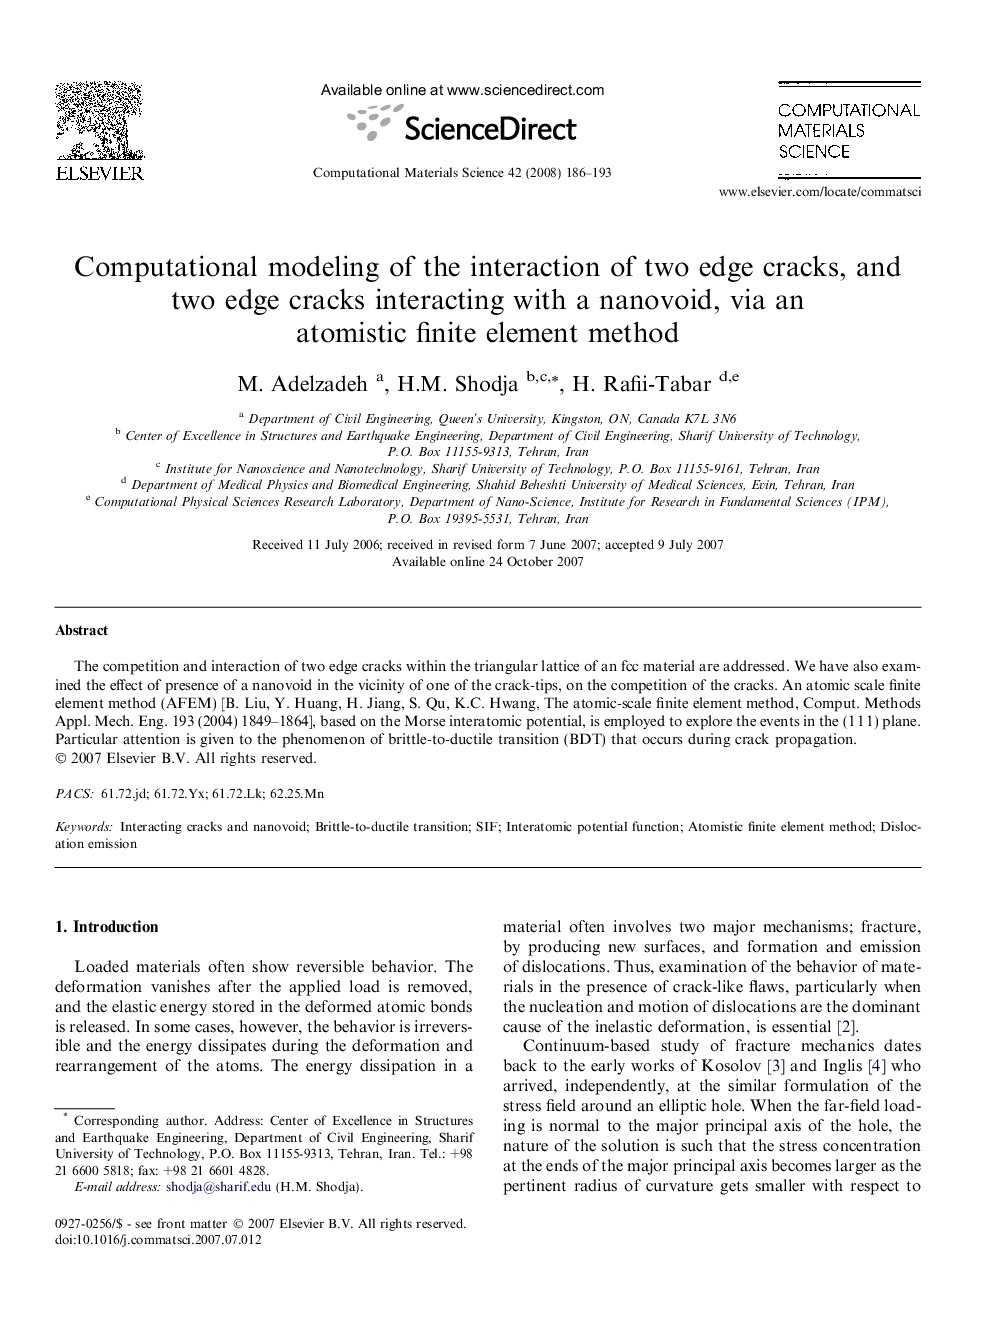 Computational modeling of the interaction of two edge cracks, and two edge cracks interacting with a nanovoid, via an atomistic finite element method